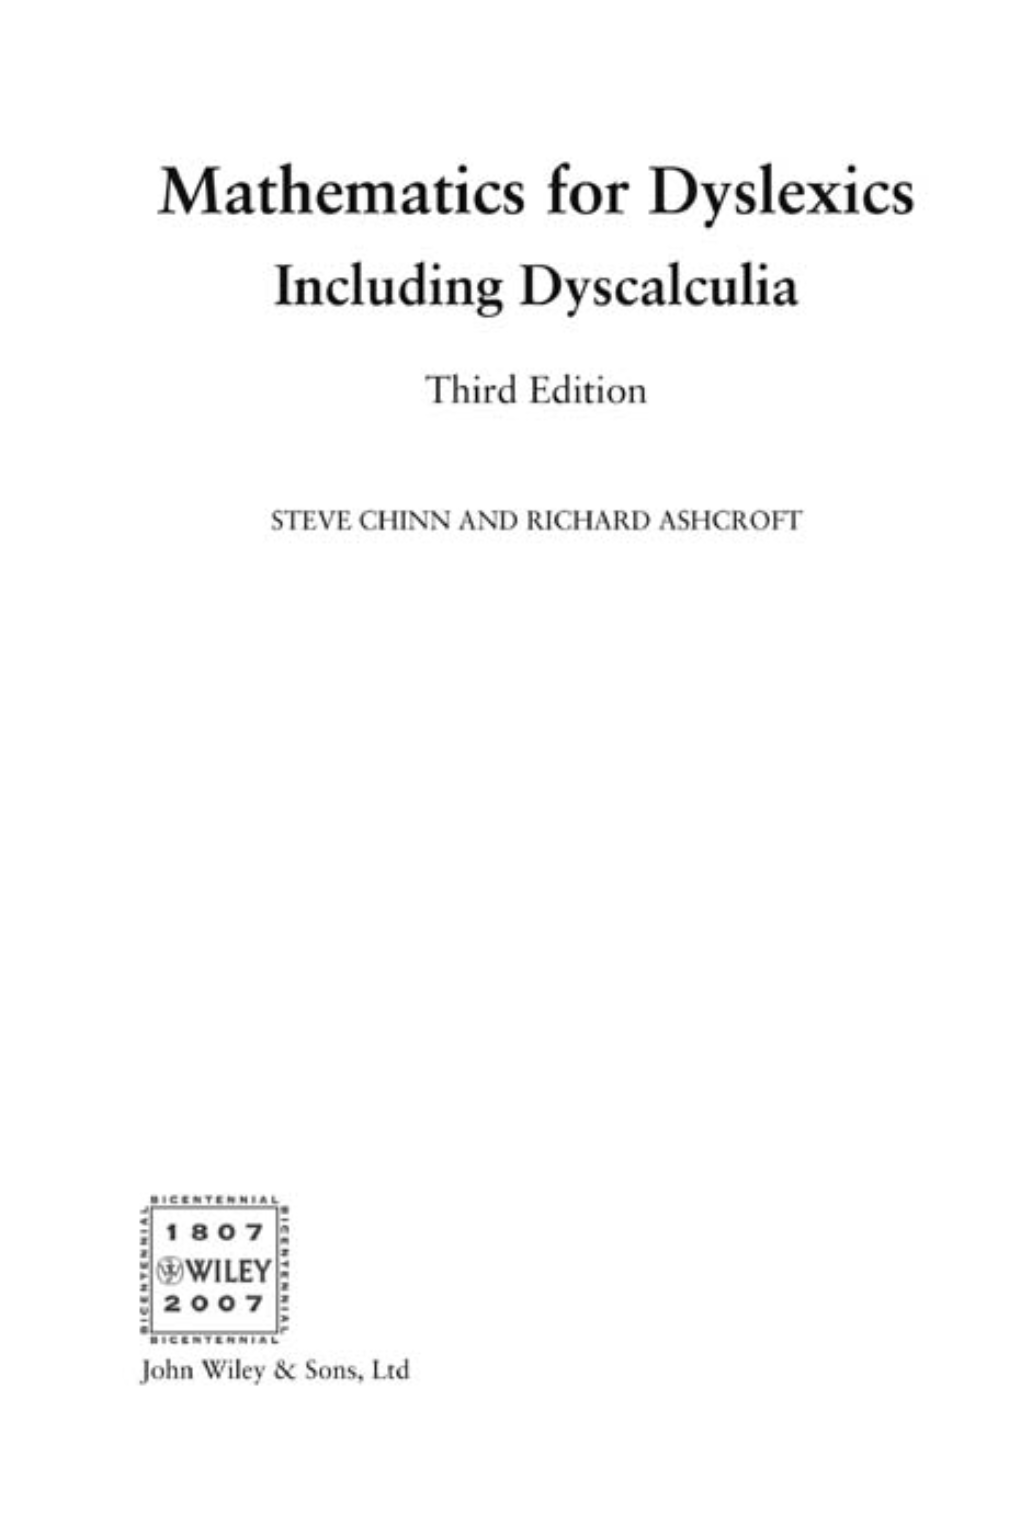 Mathematics for Dyslexics Including Dyscalculia